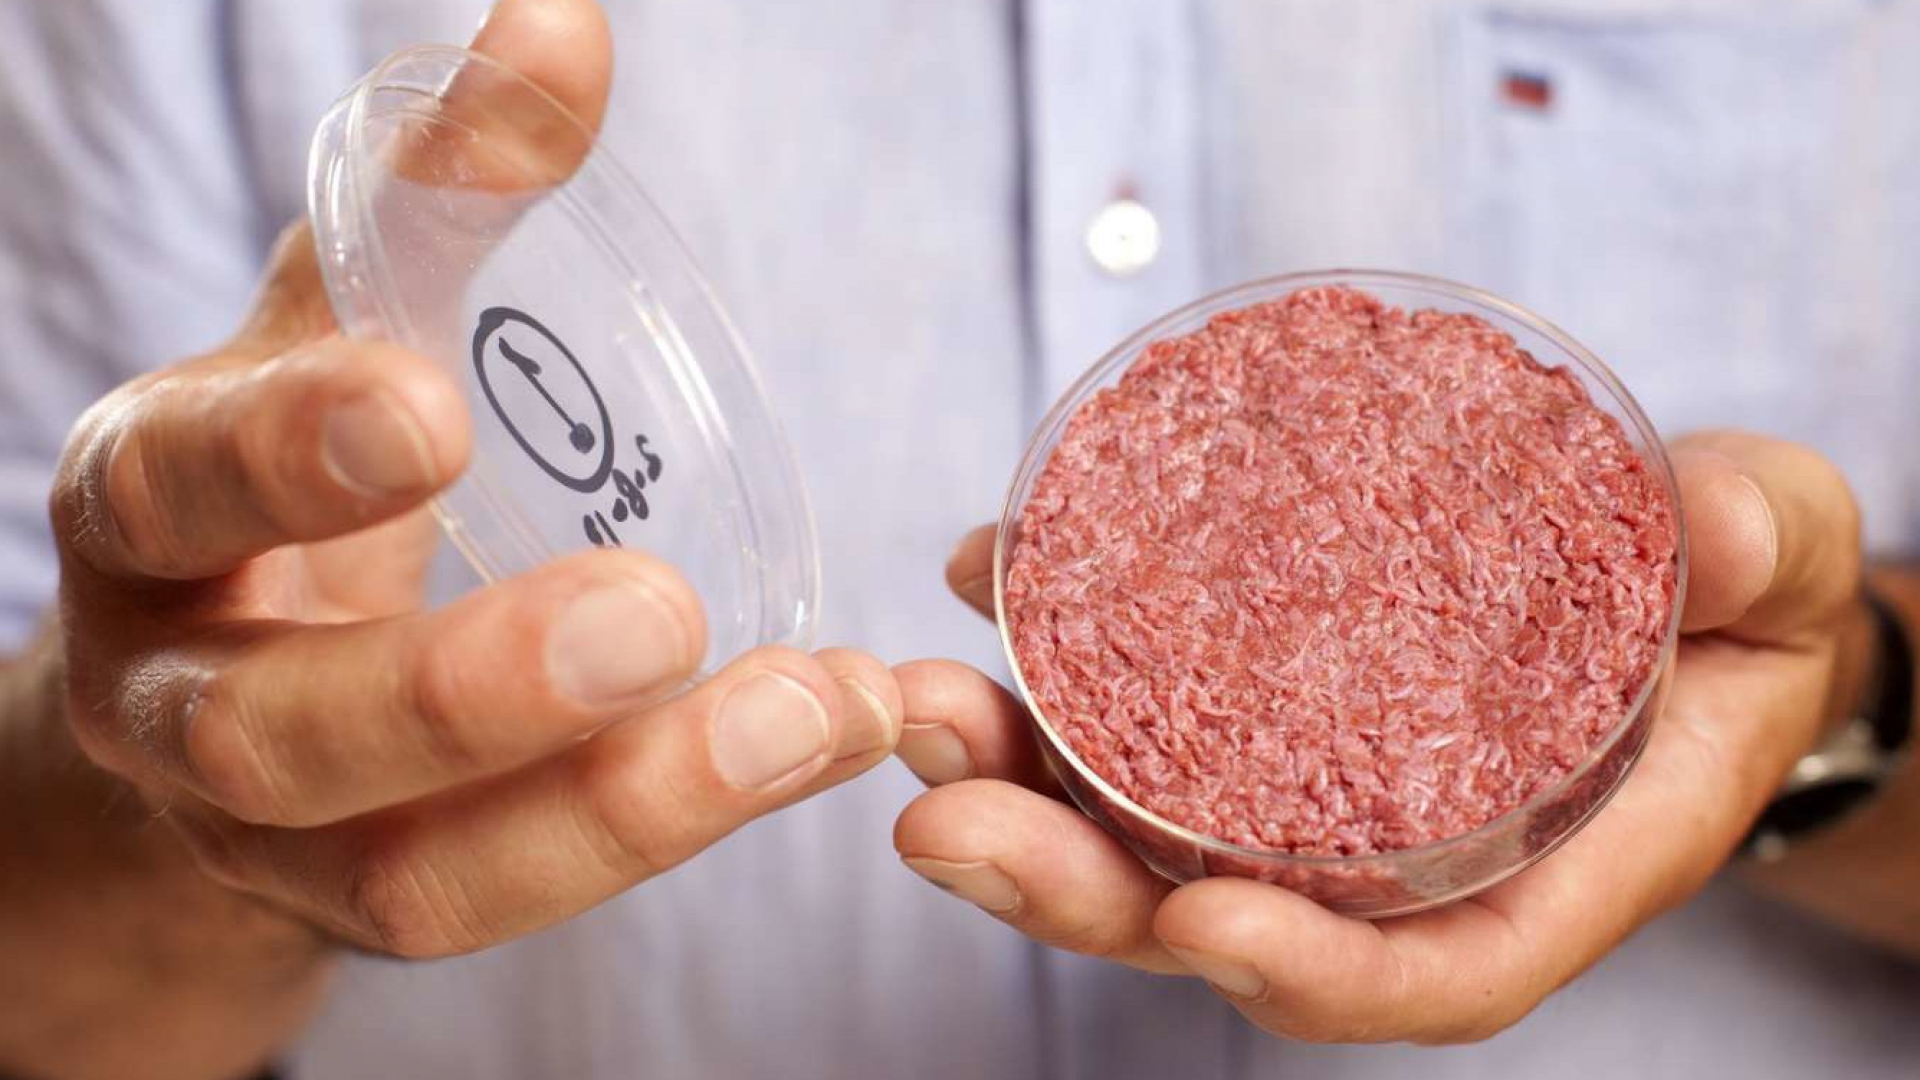 What Lies Beyond Cultured Meat: The delicacy of lab-grown meat